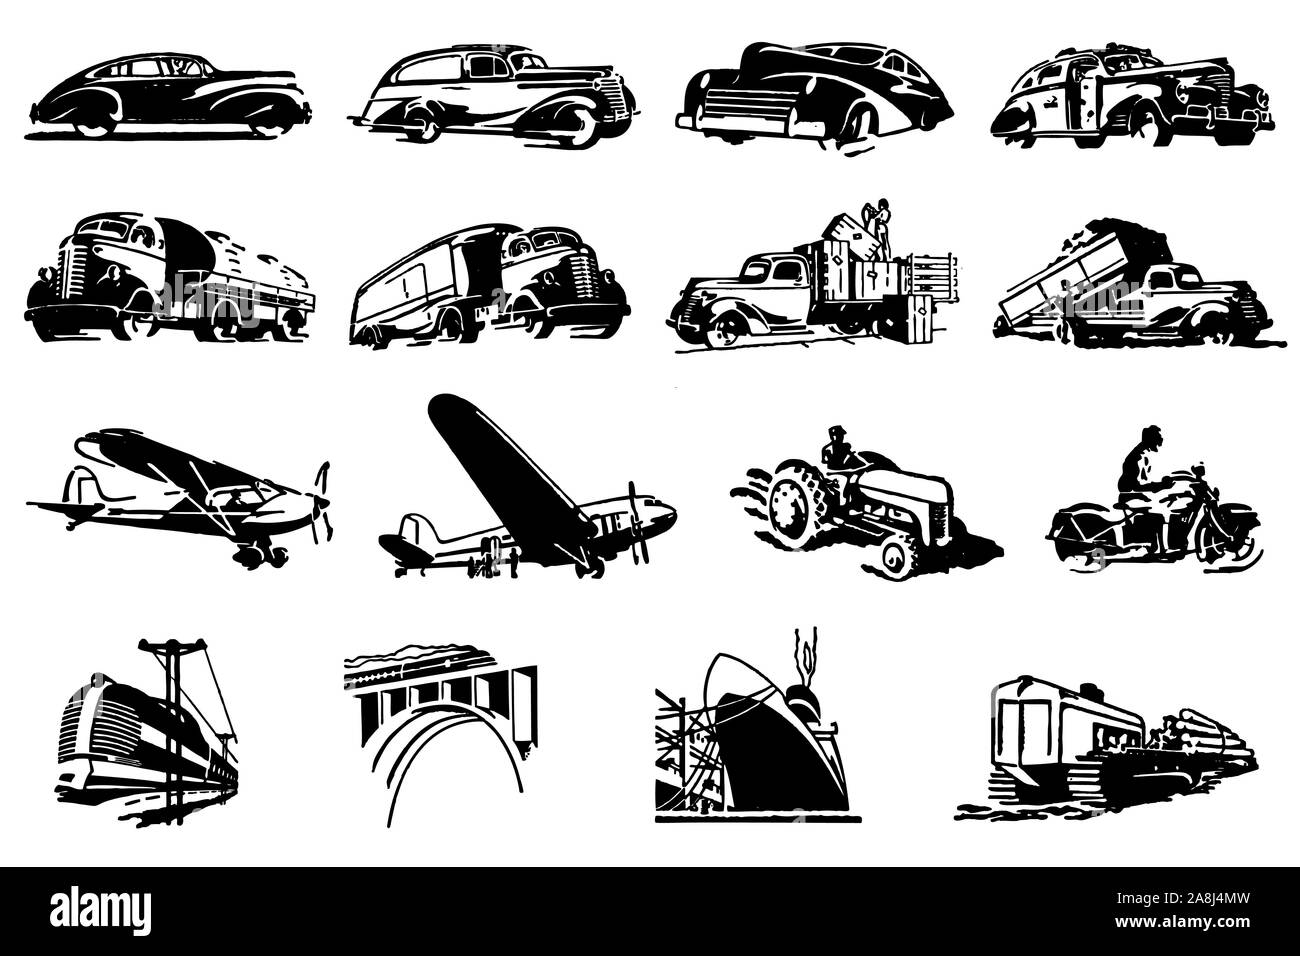 Set of historical transportation icons or pictograms Stock Vector